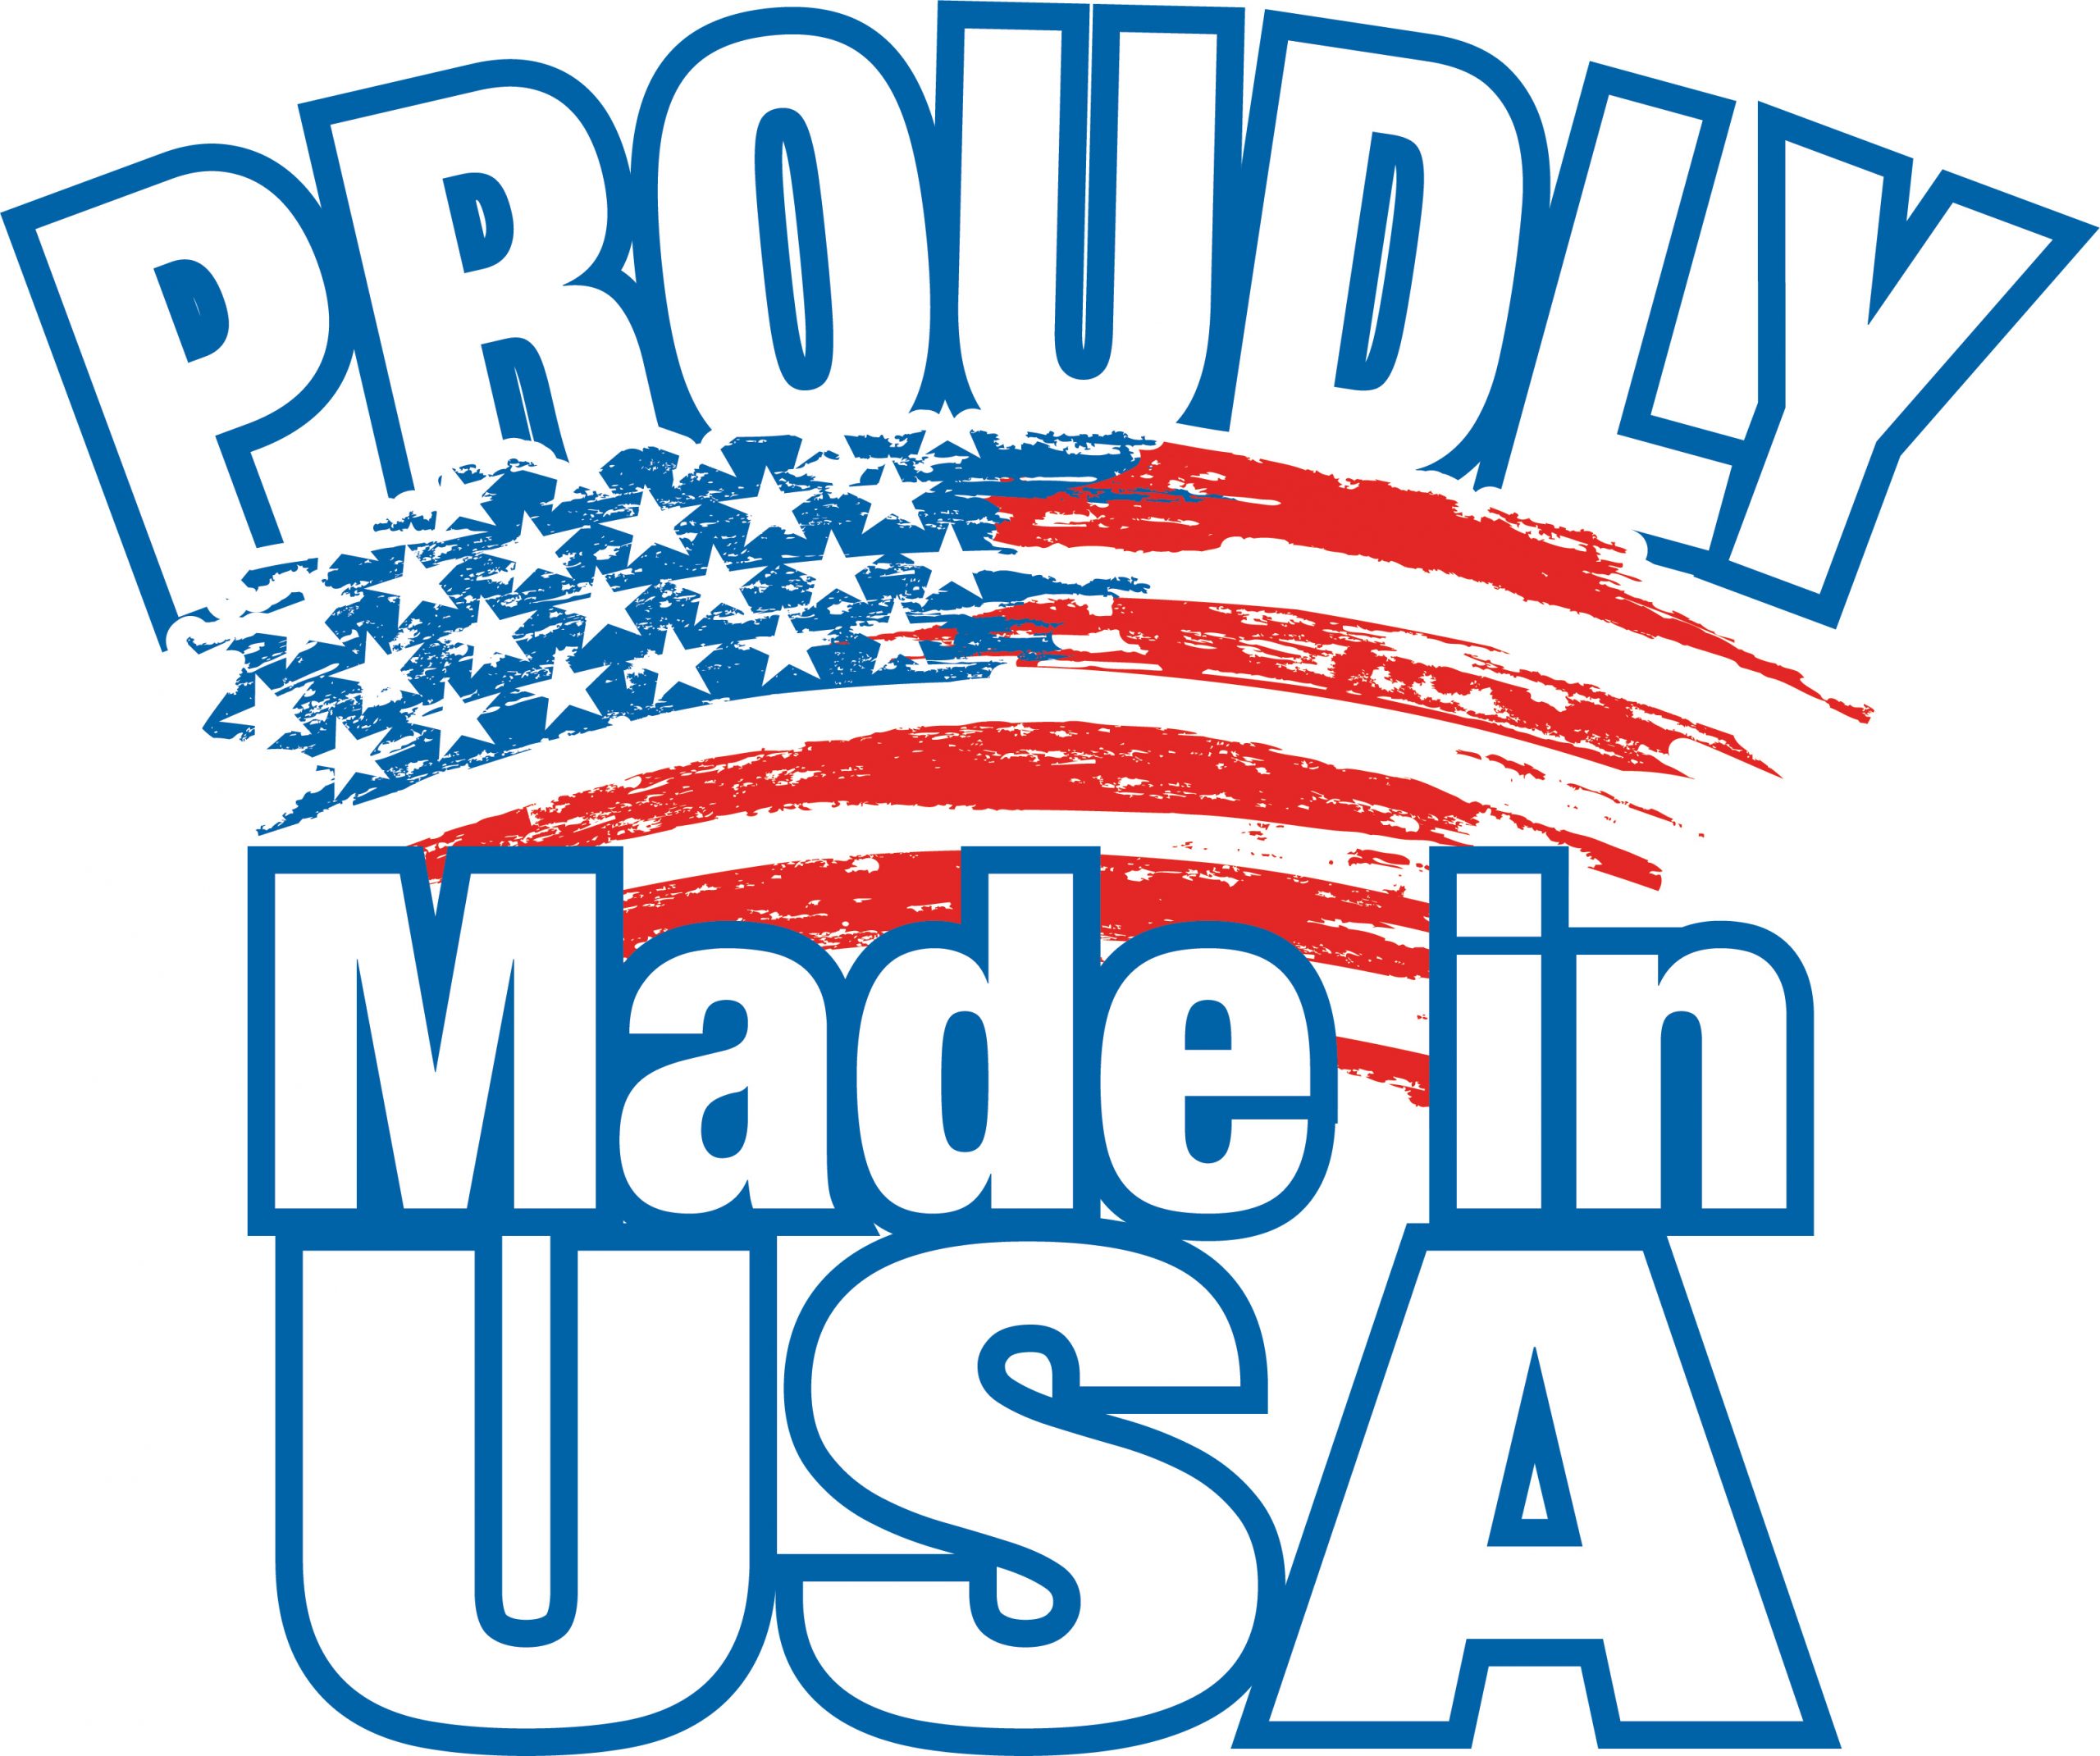 Grade “A” Quality – American Made Products